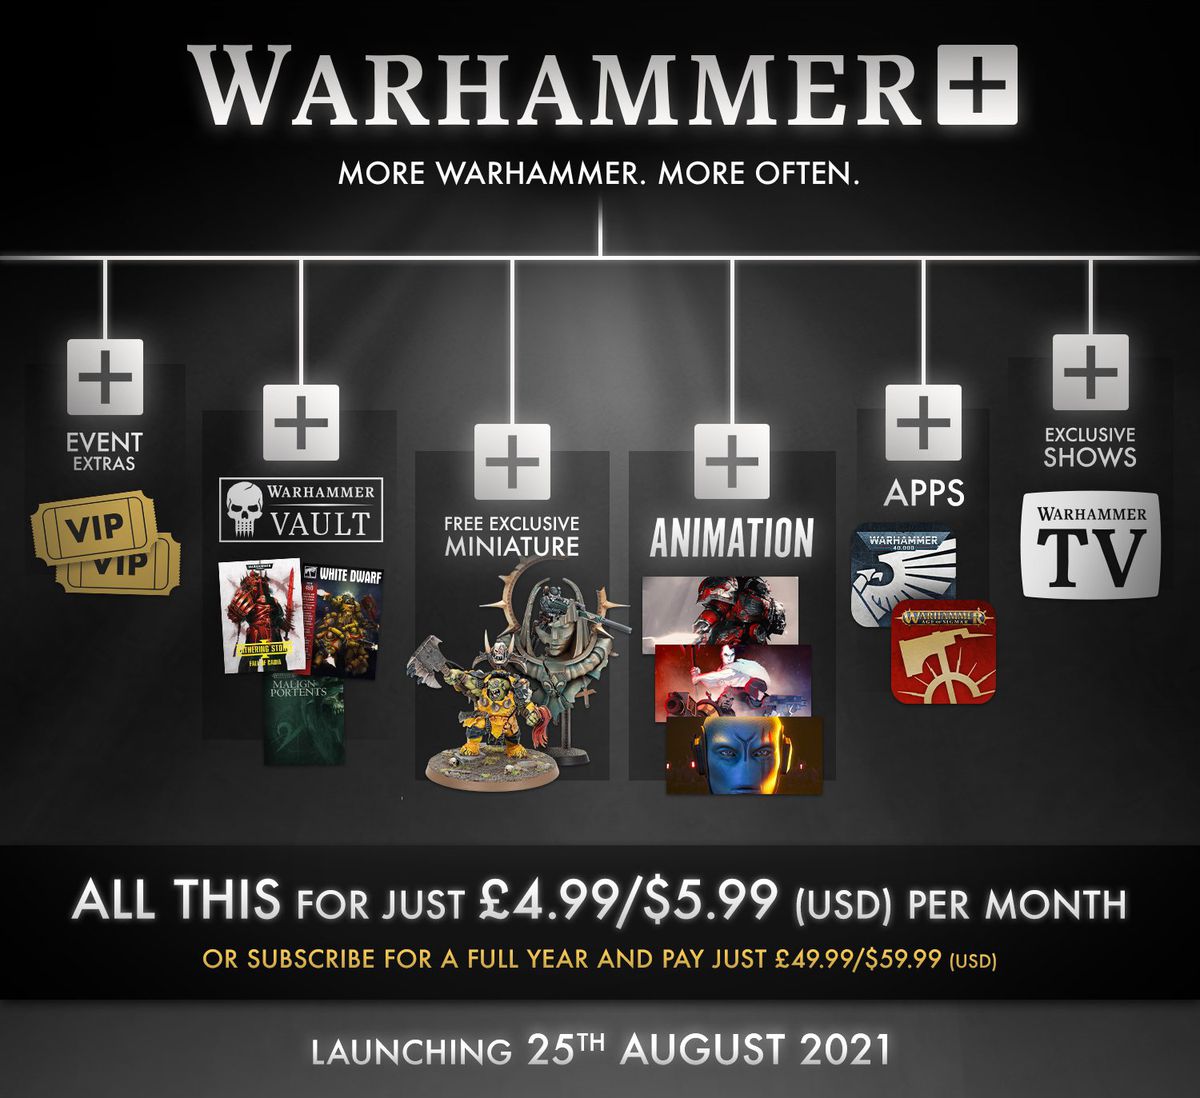 Warhammer’s new subscription streaming service is coming to iOS, Android, and smart TVs